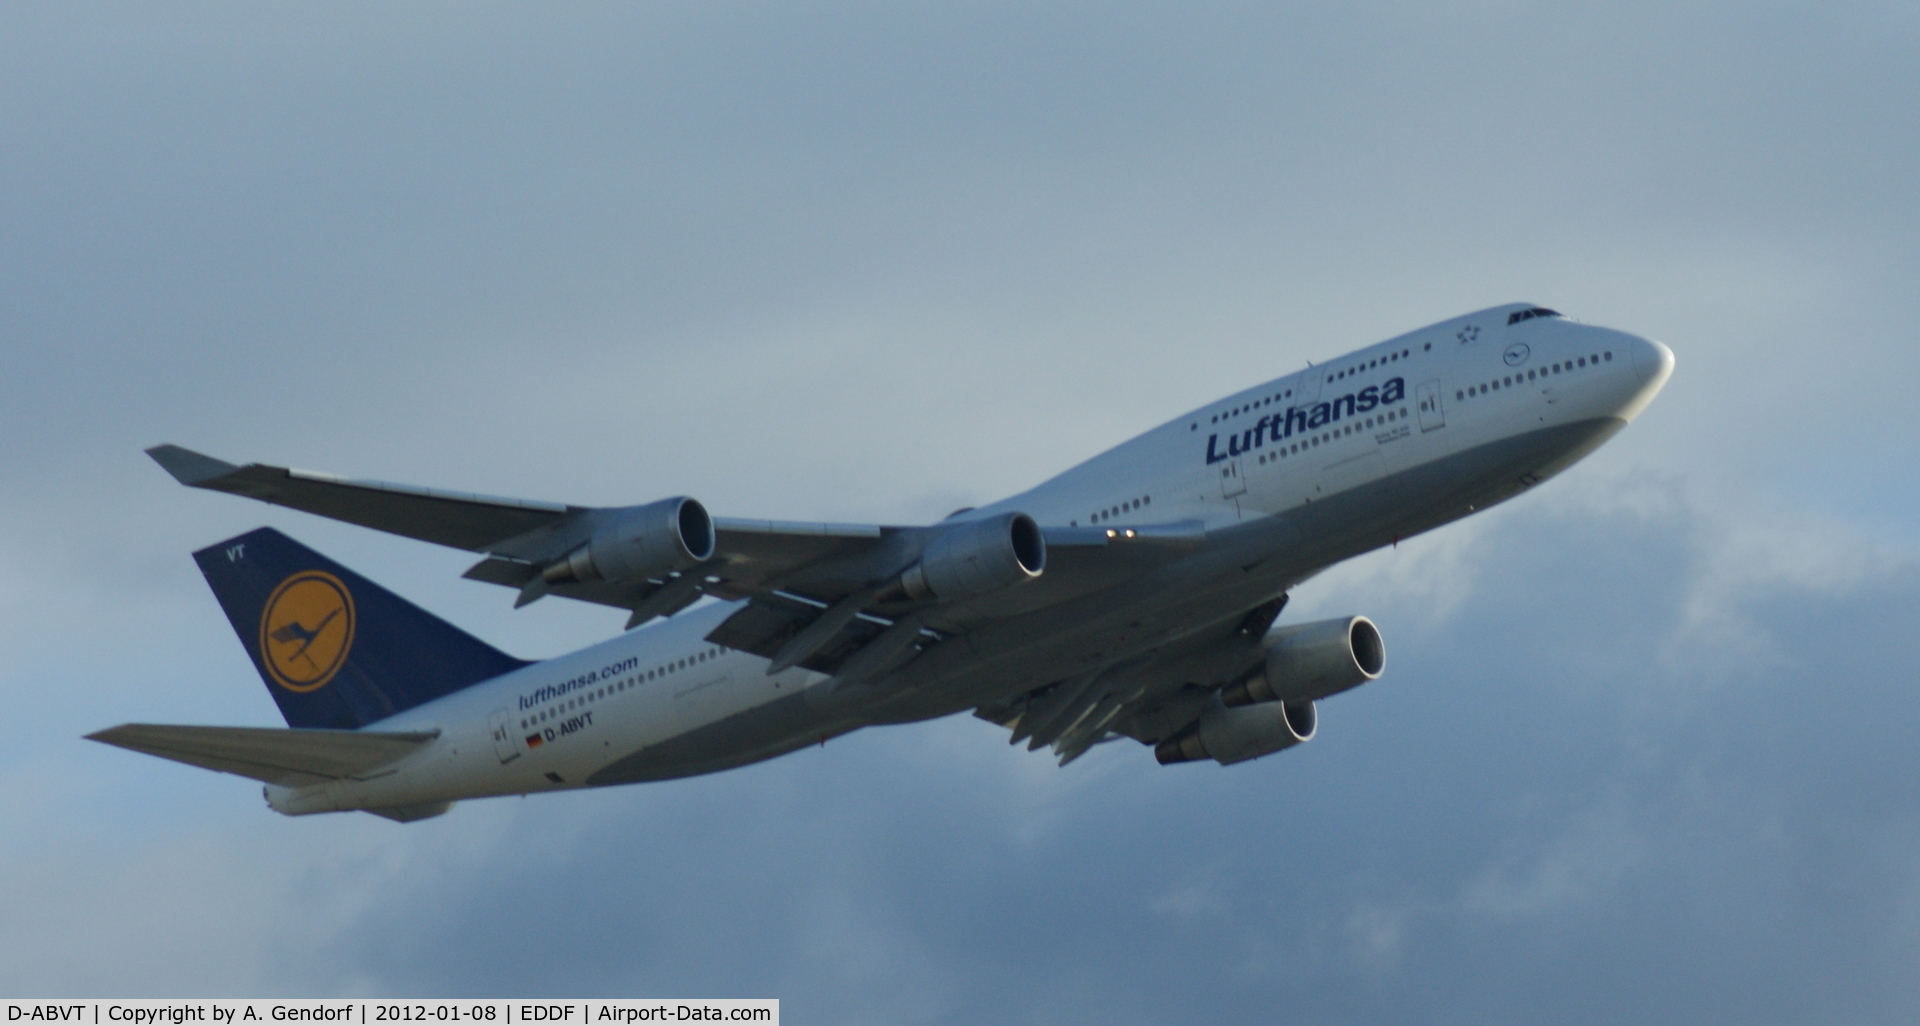 D-ABVT, 1997 Boeing 747-430 C/N 28287, Lufthansa, climbing out at Frankfurt Int´l (EDDF) after take off on runway 25C